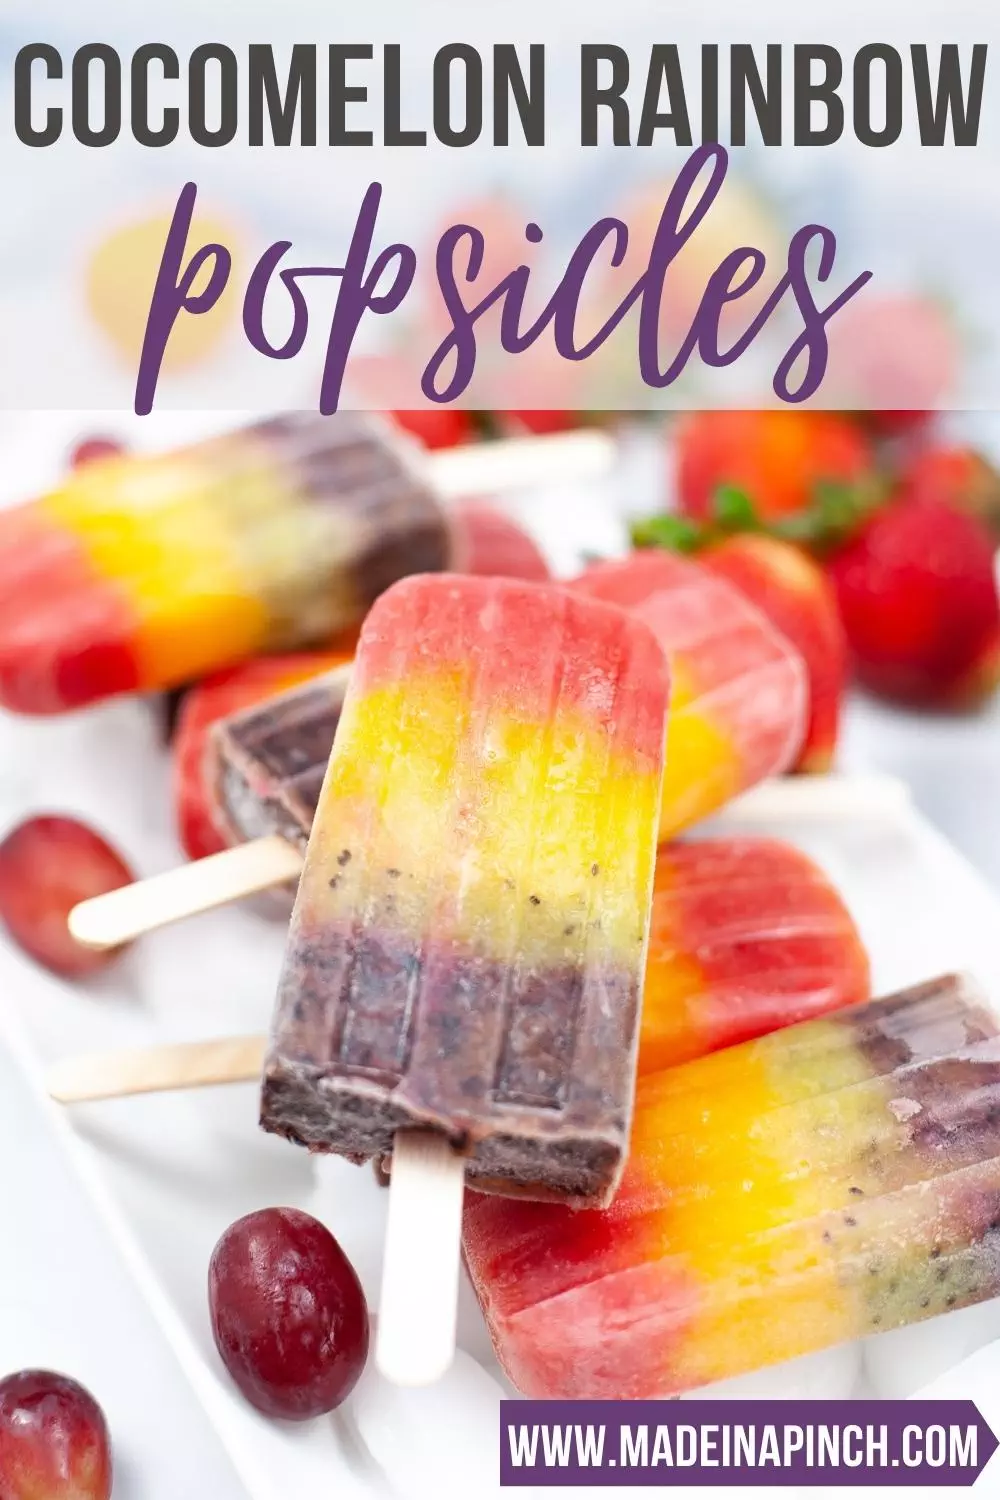 Cocomelon rainbow popsicles pin image